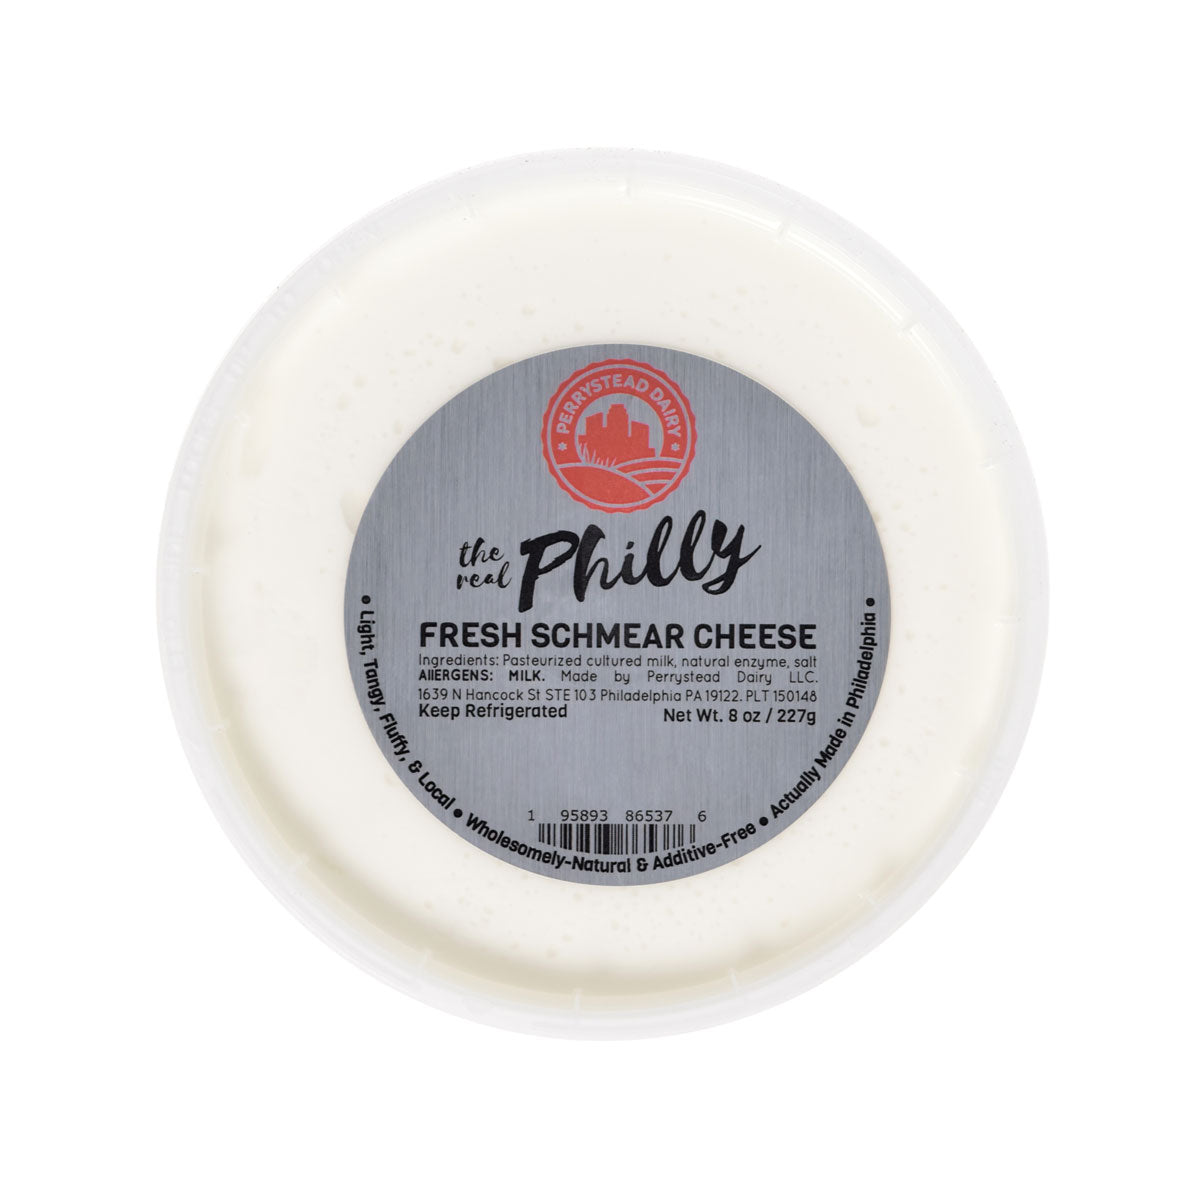 Perrystead Dairy The Real Philly Fresh Schmear Cheese 8 OZ